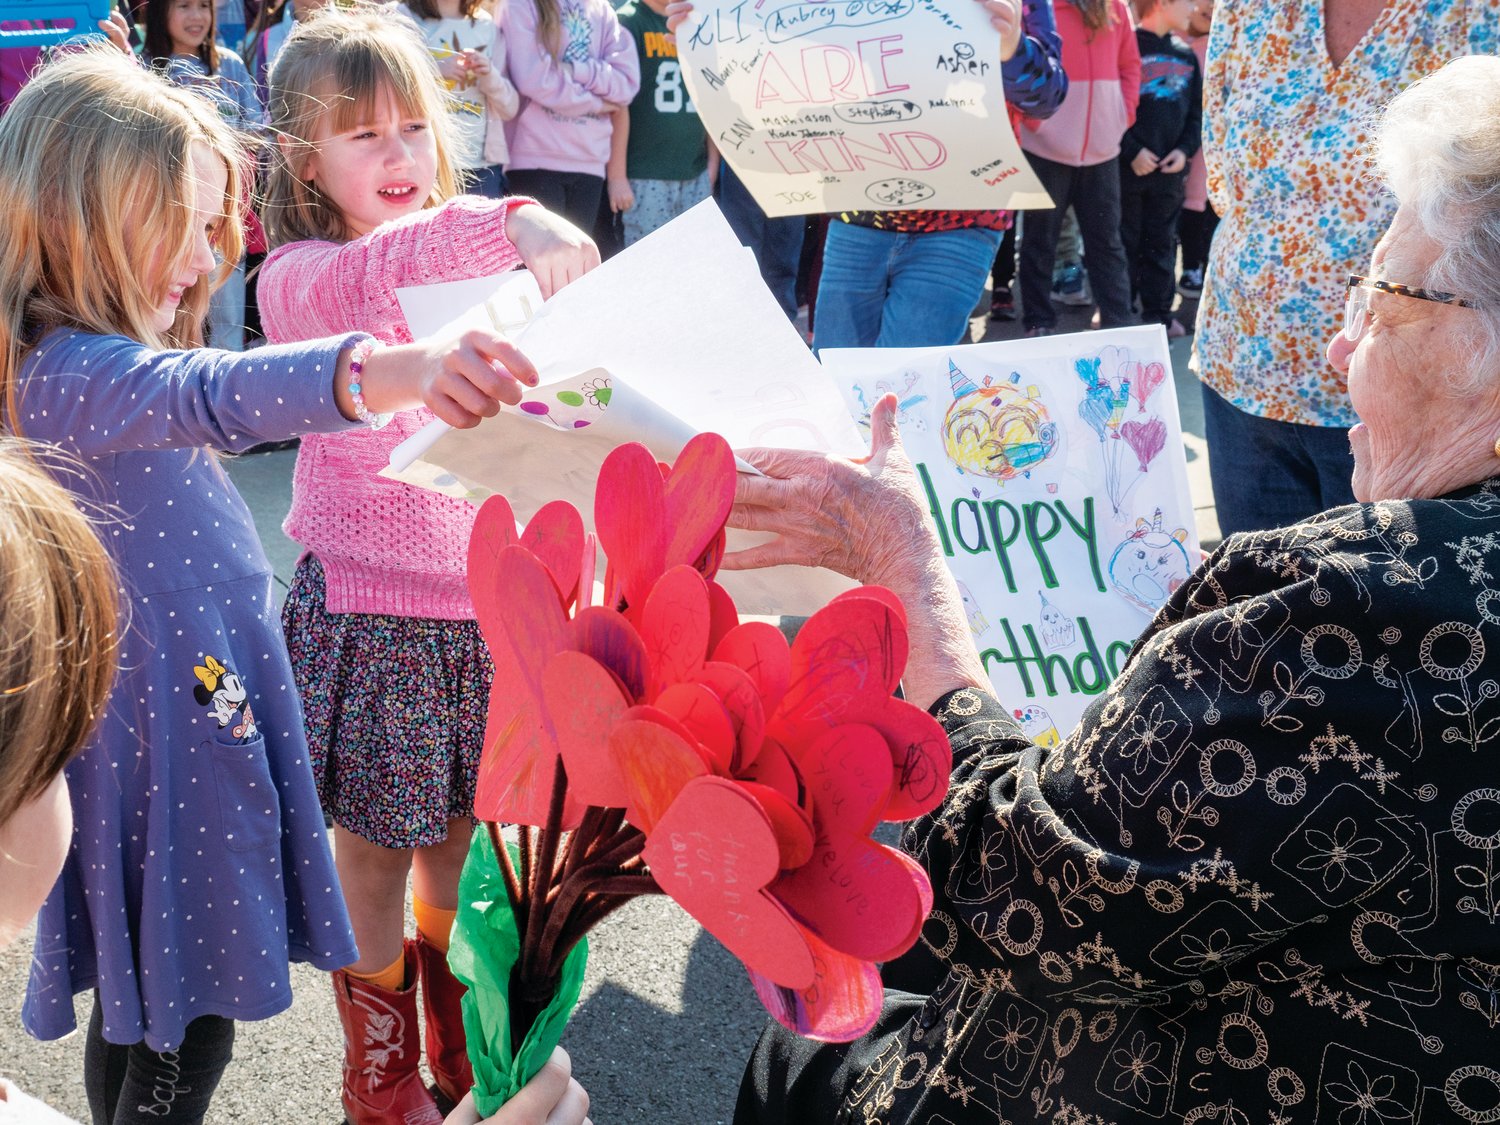 Students at P.A. Guth Elementary School in Perkasie present Dr. Patricia Guth with cards celebrating her 90th birthday. Guth worked in the Pennridge School District for more than 30 years, first as a teacher and eventually as the district’s assistant superintendent for curriculum.